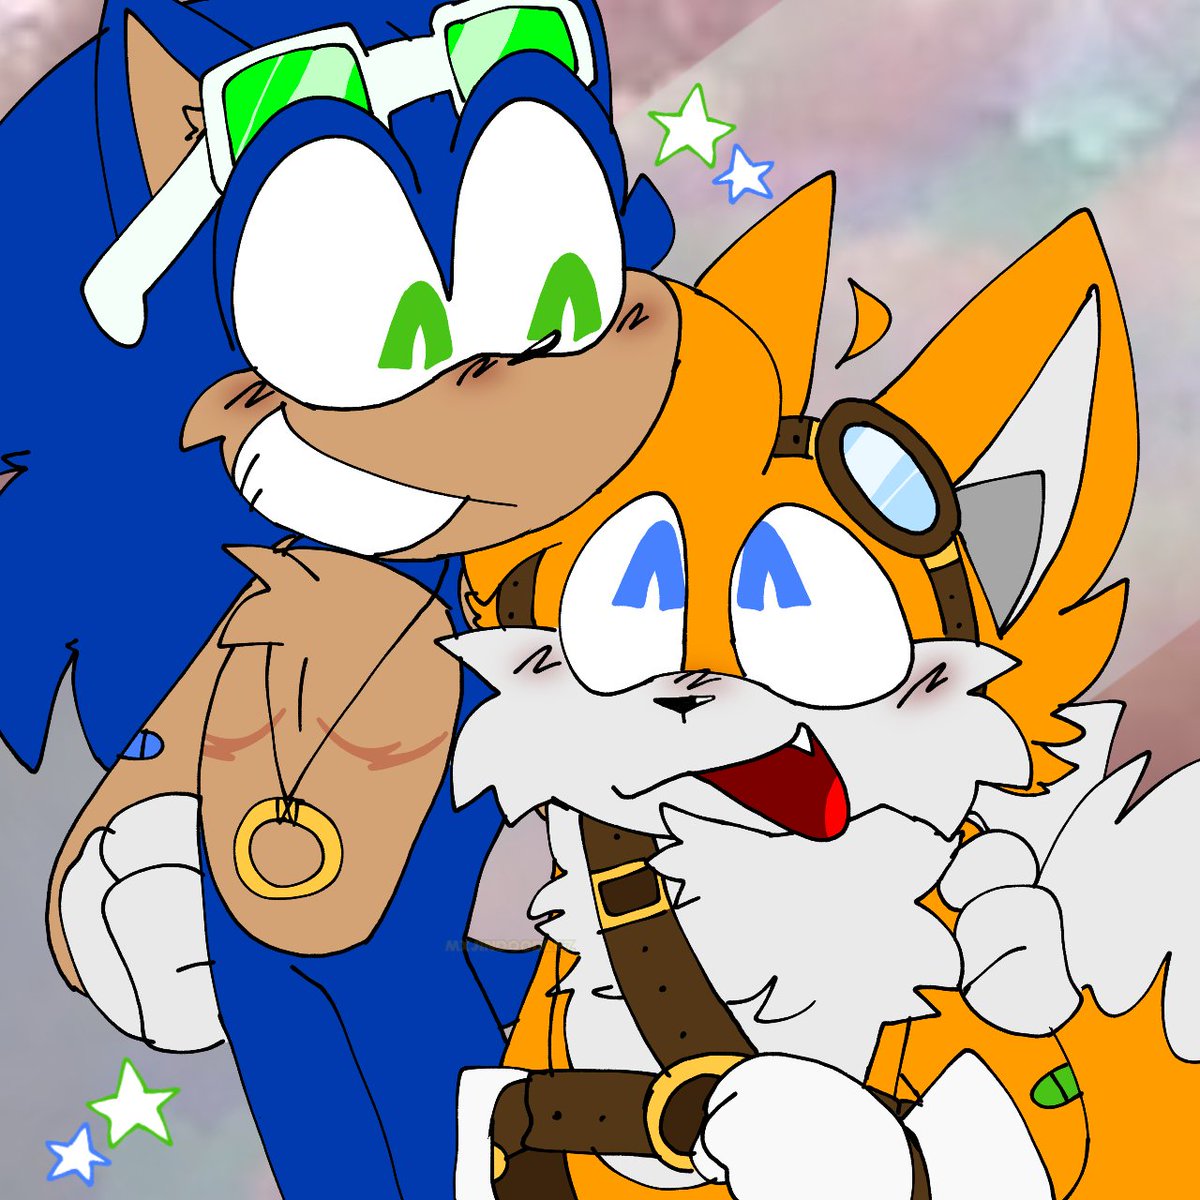 drew the brotherz again ! !! missed these two :33

[ #sonicthehedgehog #sonic #milestailsprower #tails ]